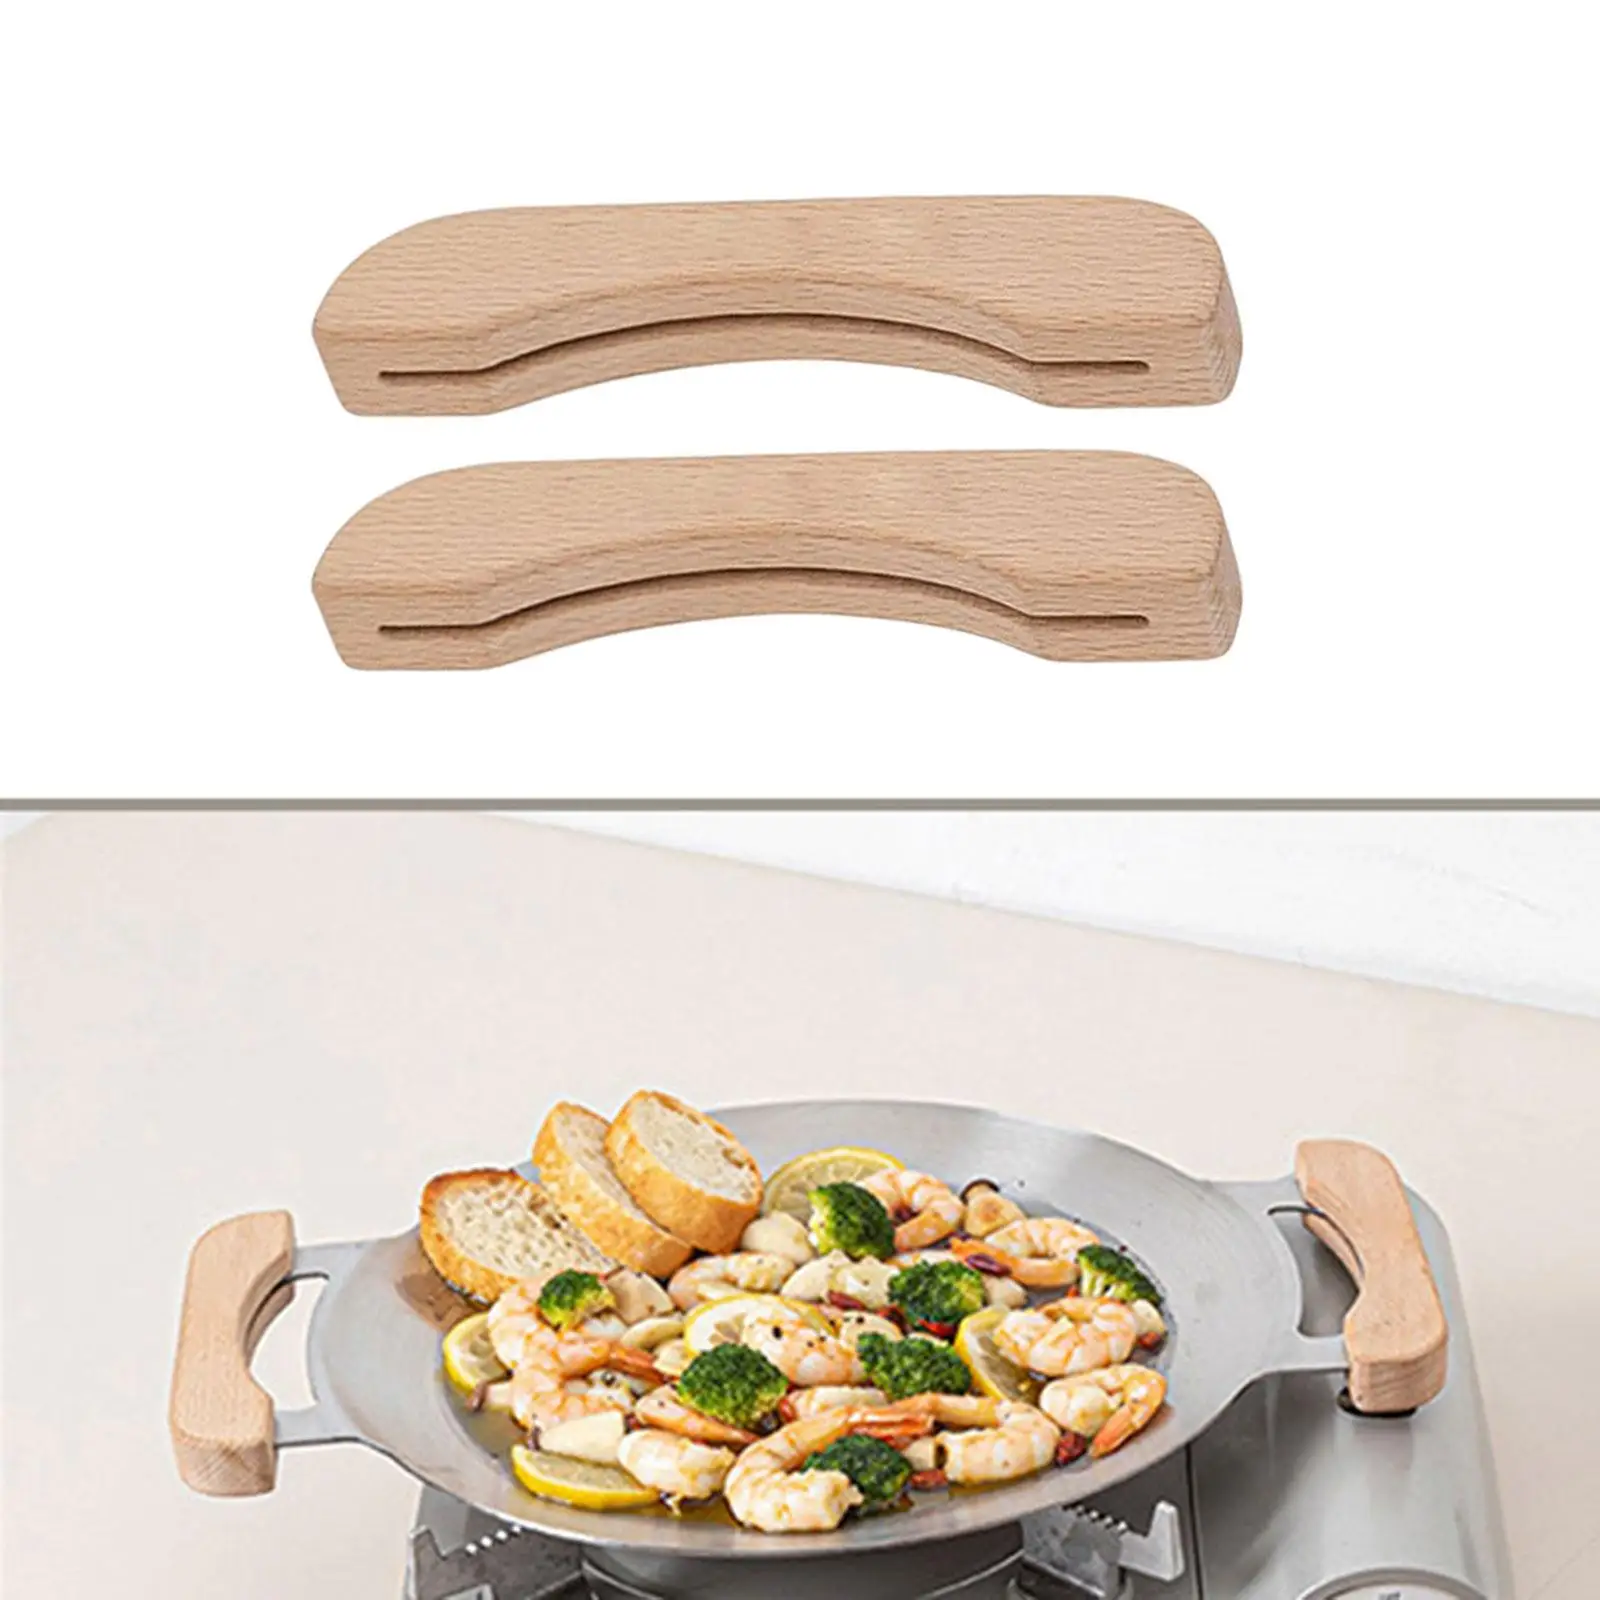 Solid Wood Barbecue Pan Handle Scald Proof Grip Replacement for Grill Pan Cookware Sauce Pan Sauteing Grilling Pan Outdoor